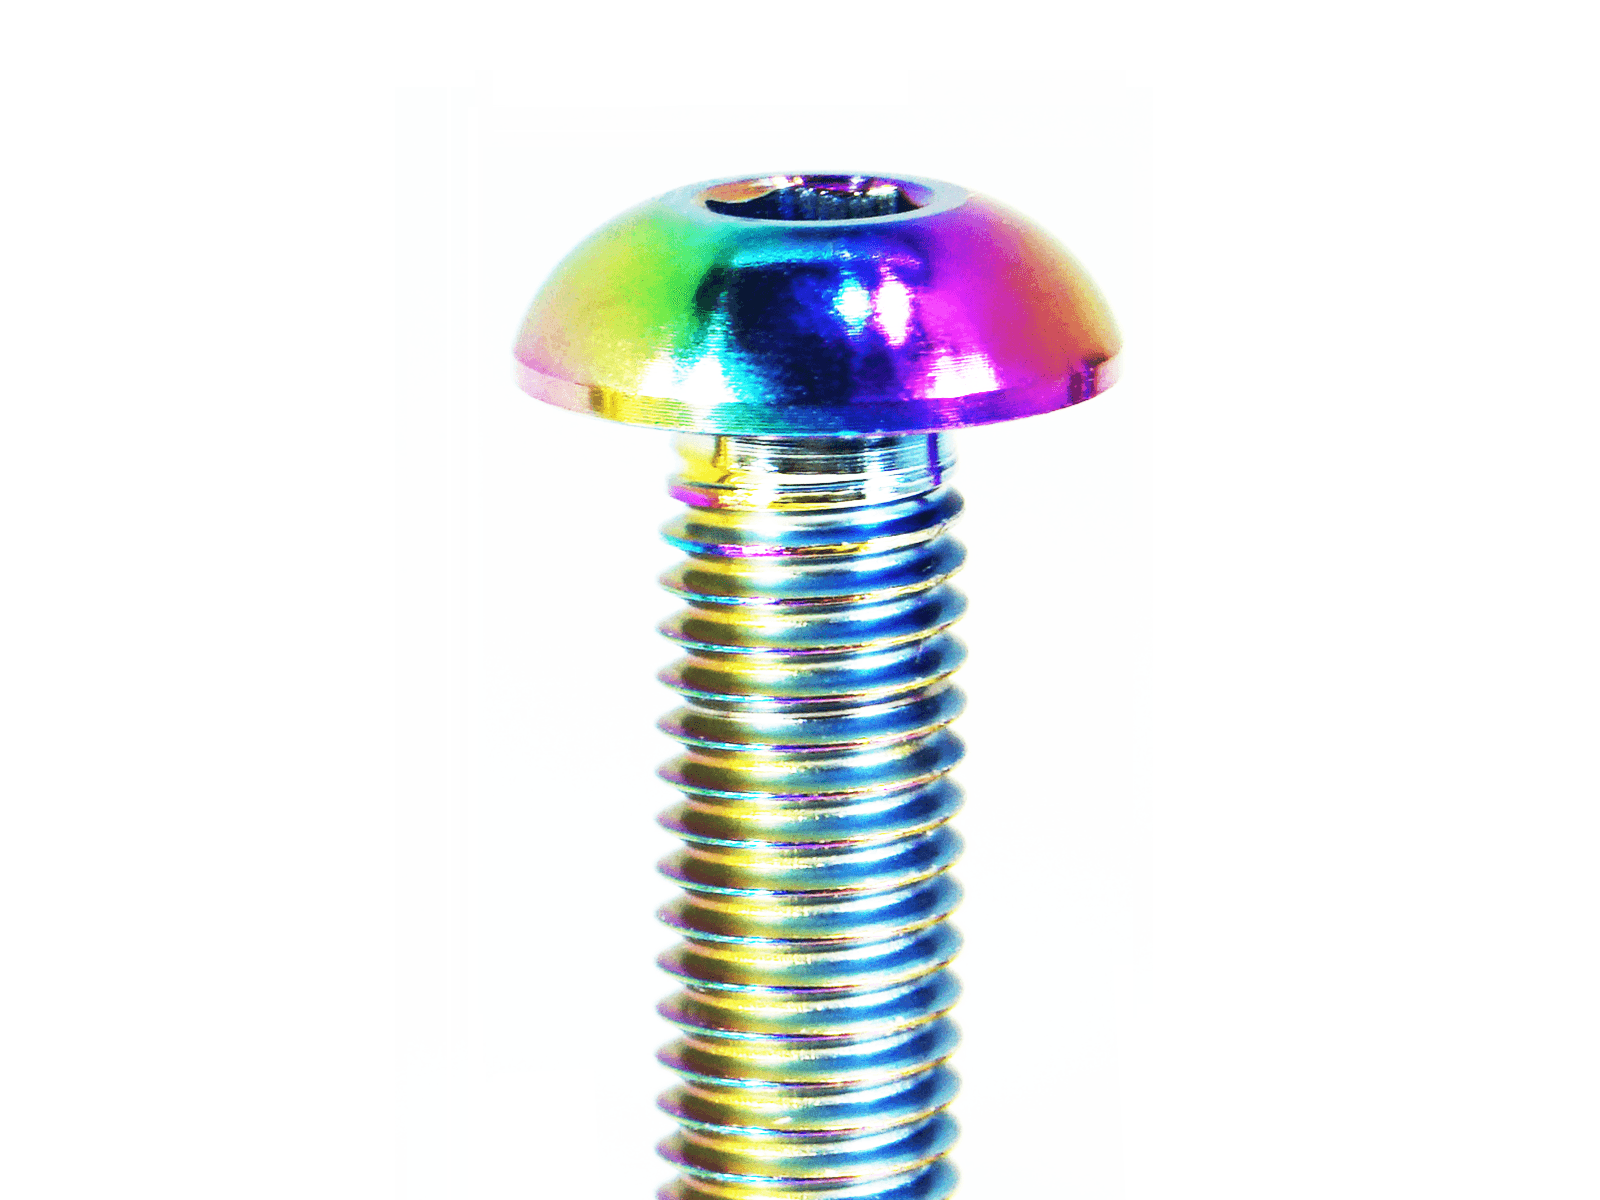 ZSPEC Button-Head Fastener, M5-0.8x20mm, Titanium, Sold per Each Flares, Over Fender, Body Element, Wings, Arches - Titanium / Billet / Stainless - Black, Burned, Gold, Purple, Silver Raw, Polished - Dress Up Bolts Hardware Washers Finish Rocket Bunny Pandem Aimgain twinz carbon signal M5 M6 M8 Wicker Bill